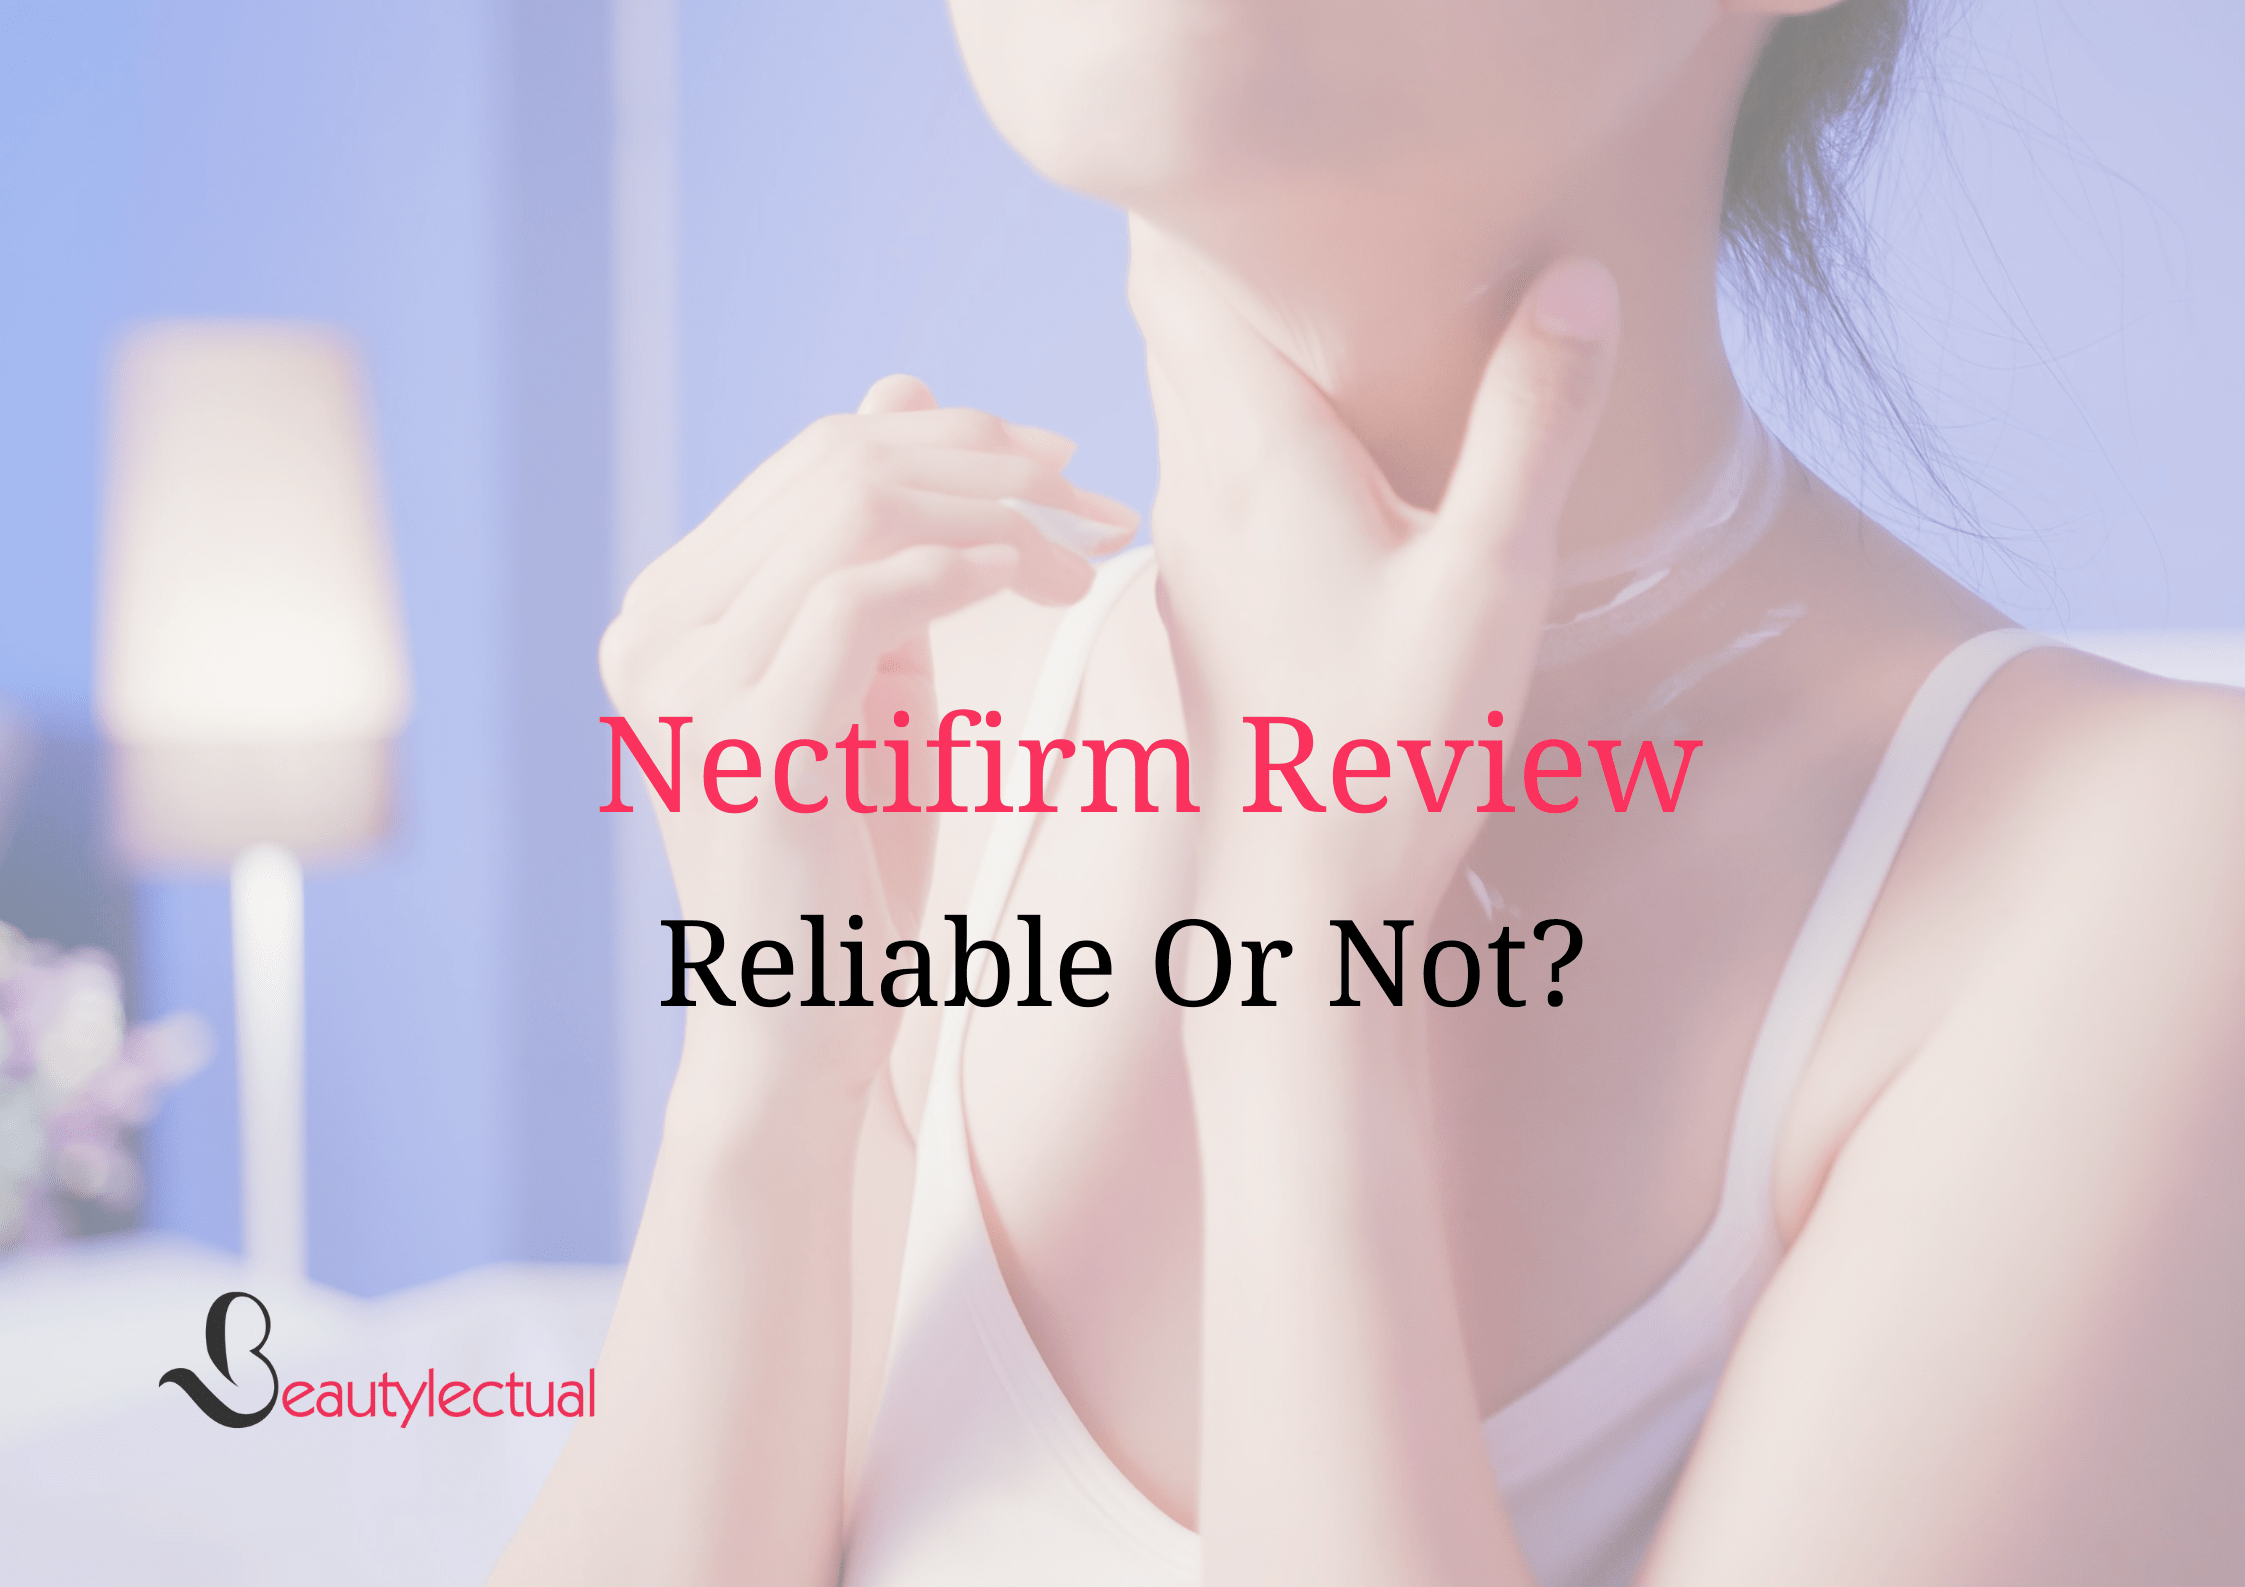 Nectifirm Review